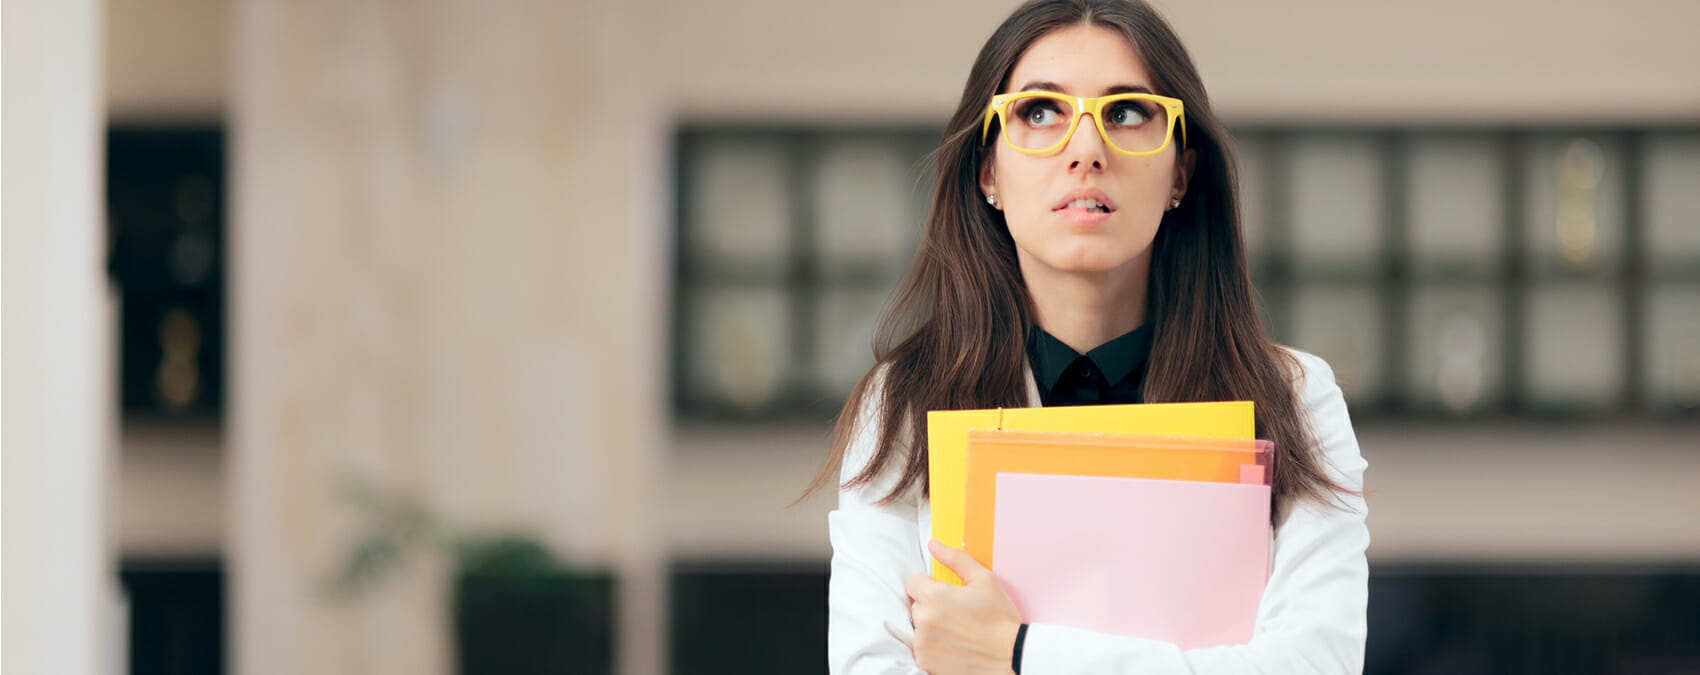 A woman wearing glasses and holding a stack of papers bites her lip and looks like she is thinking intently